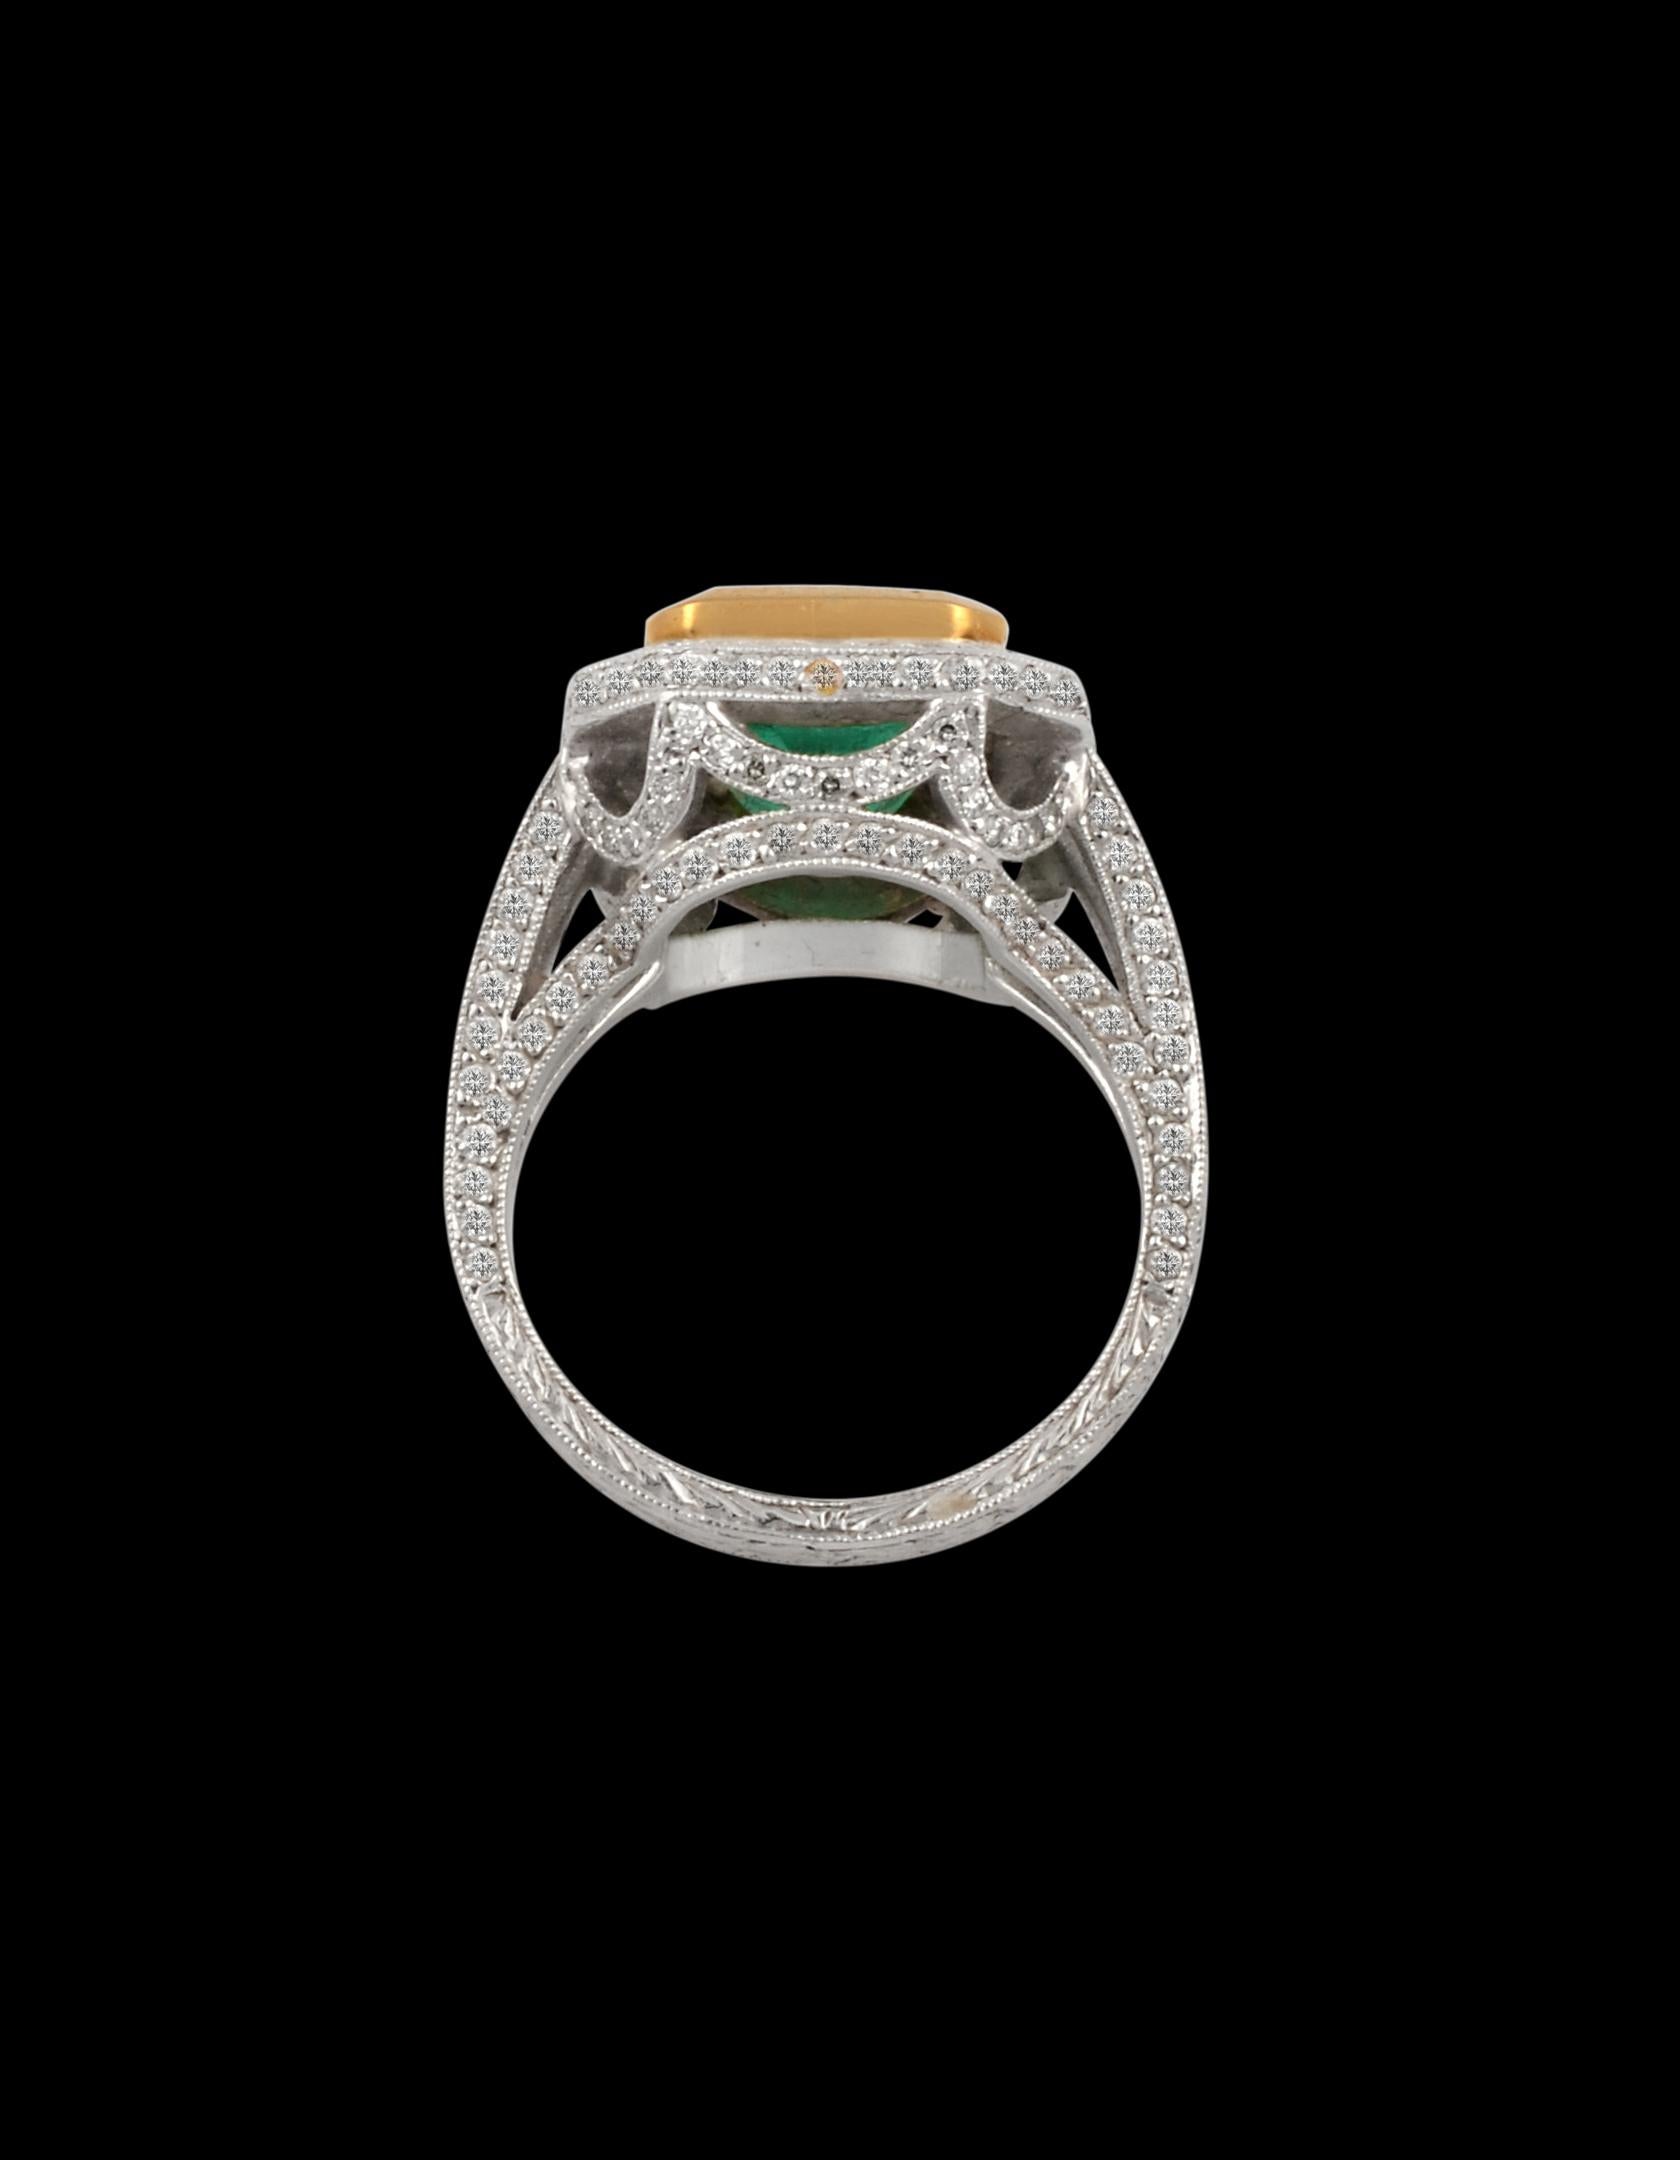 3.8 Carat Emerald Cut Colombian Emerald and Diamond Ring Platinum, Two-Tone 5